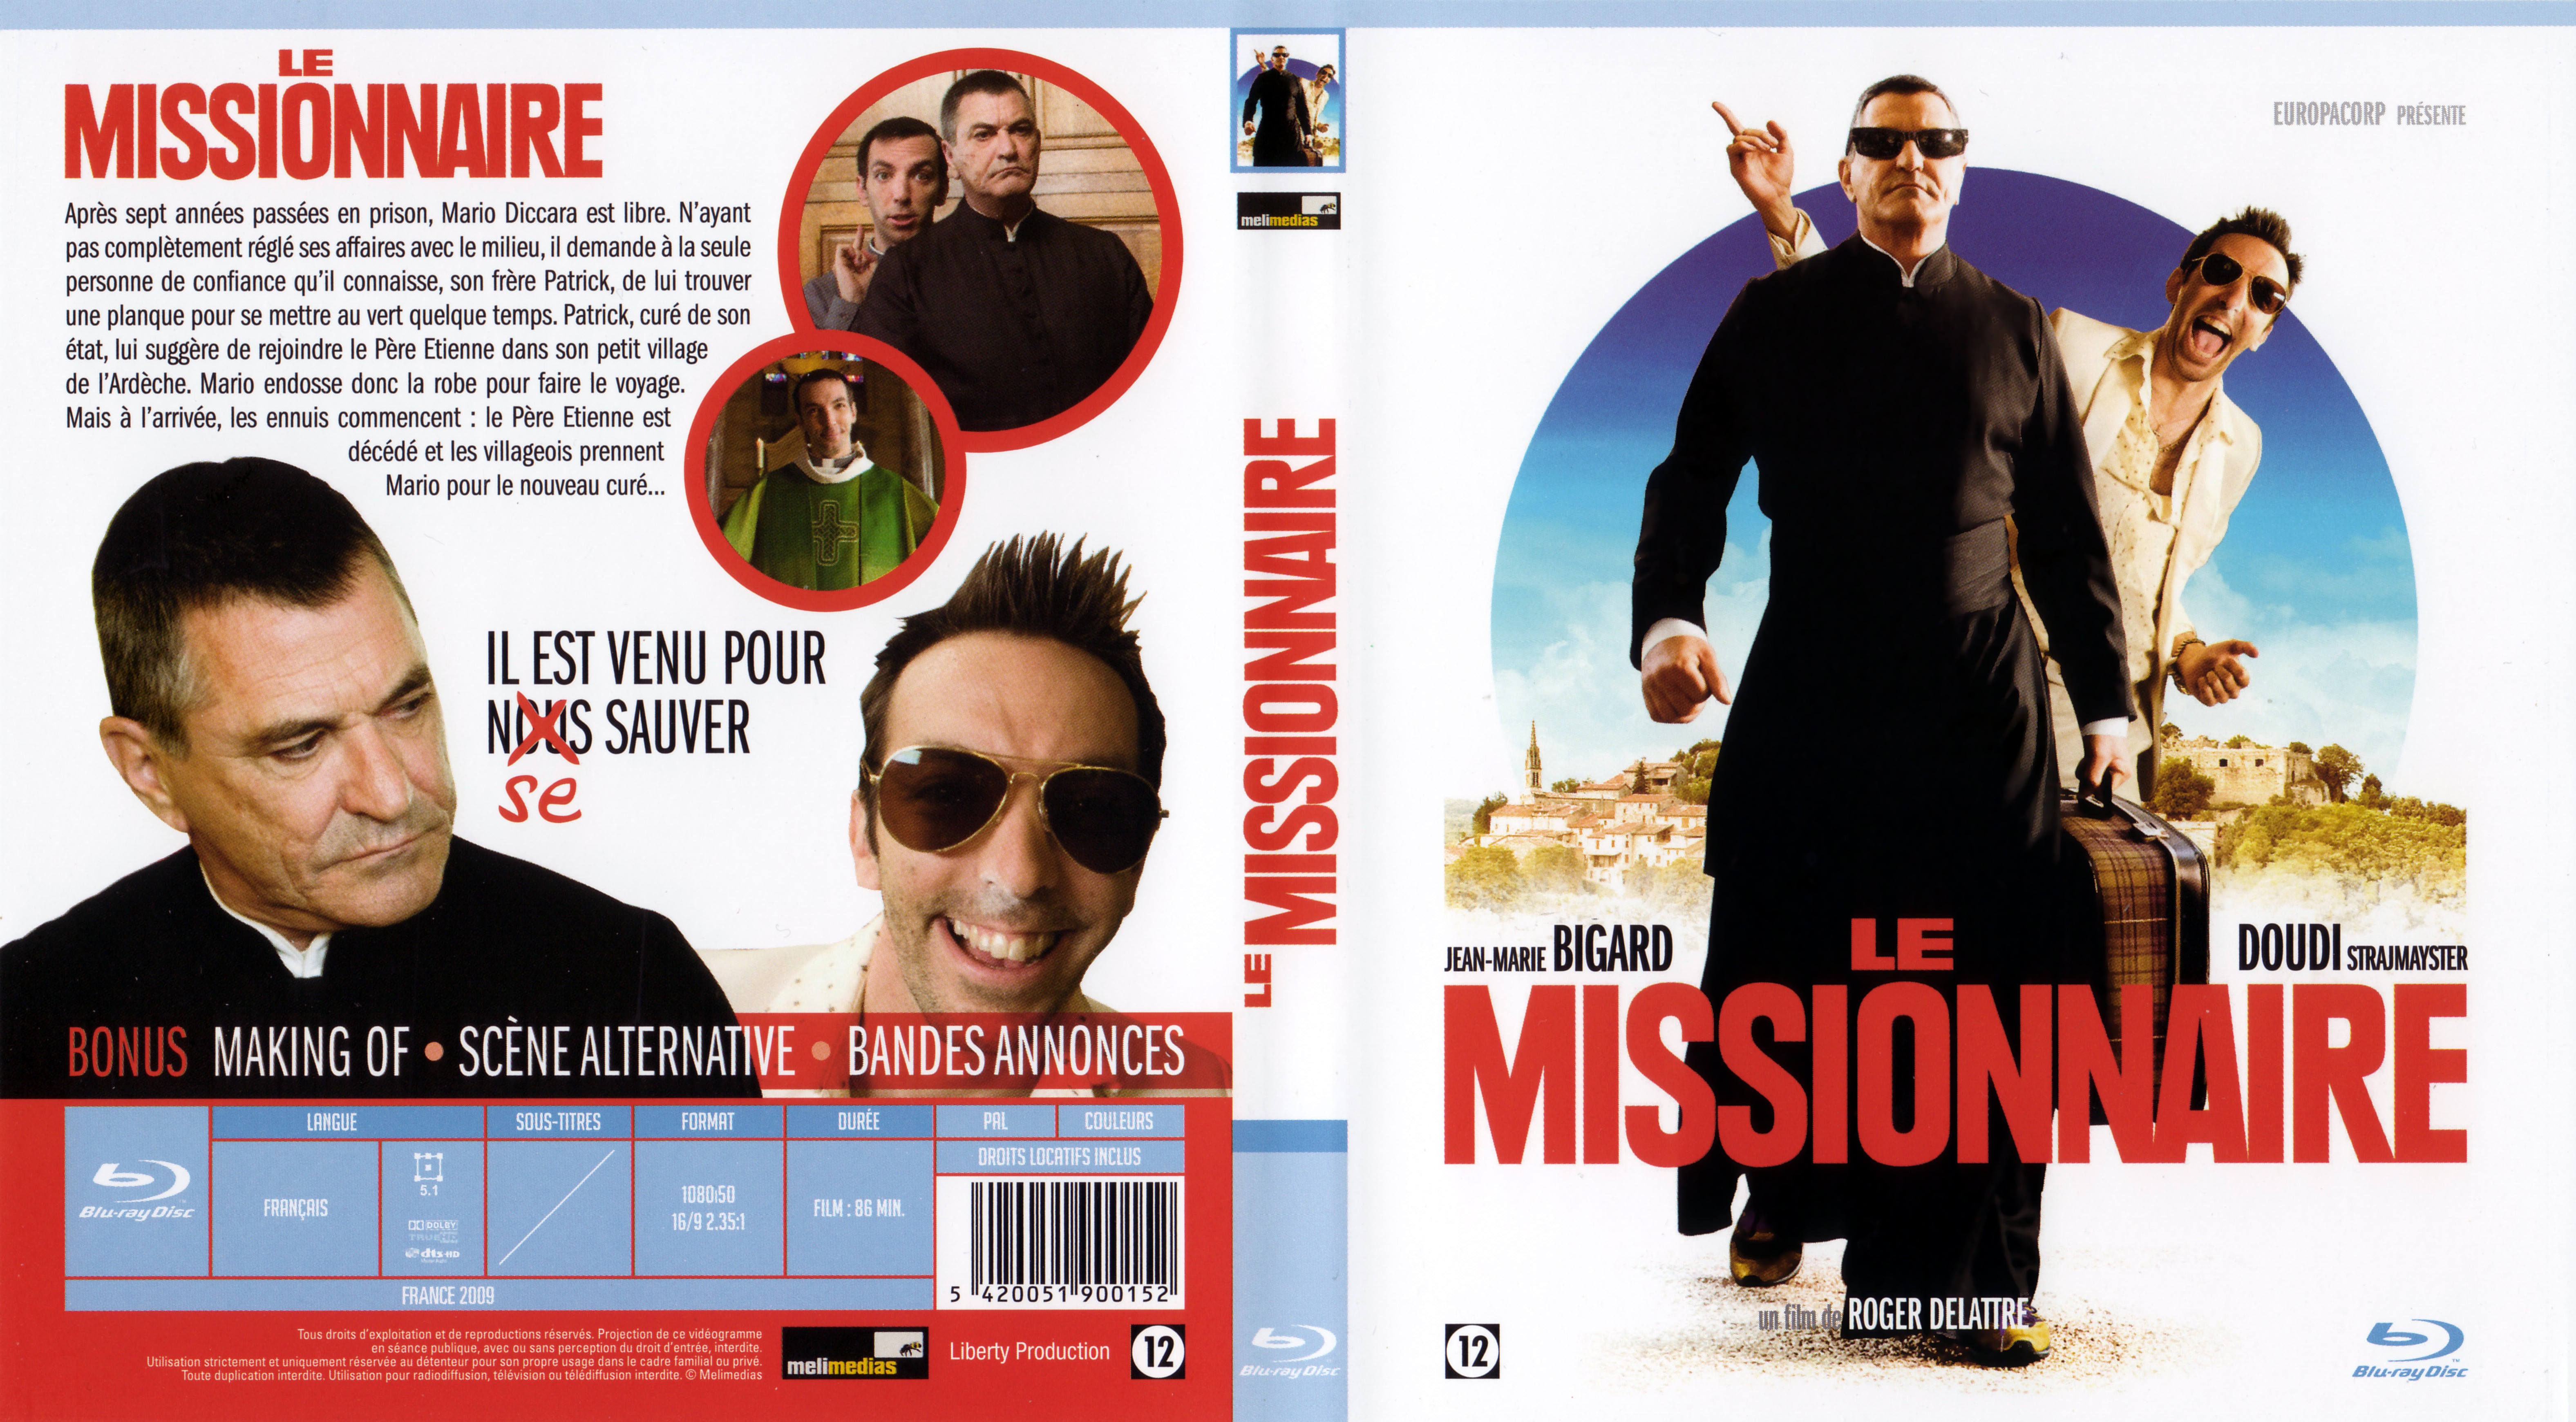 Jaquette DVD Le missionnaire (BLU-RAY) v2